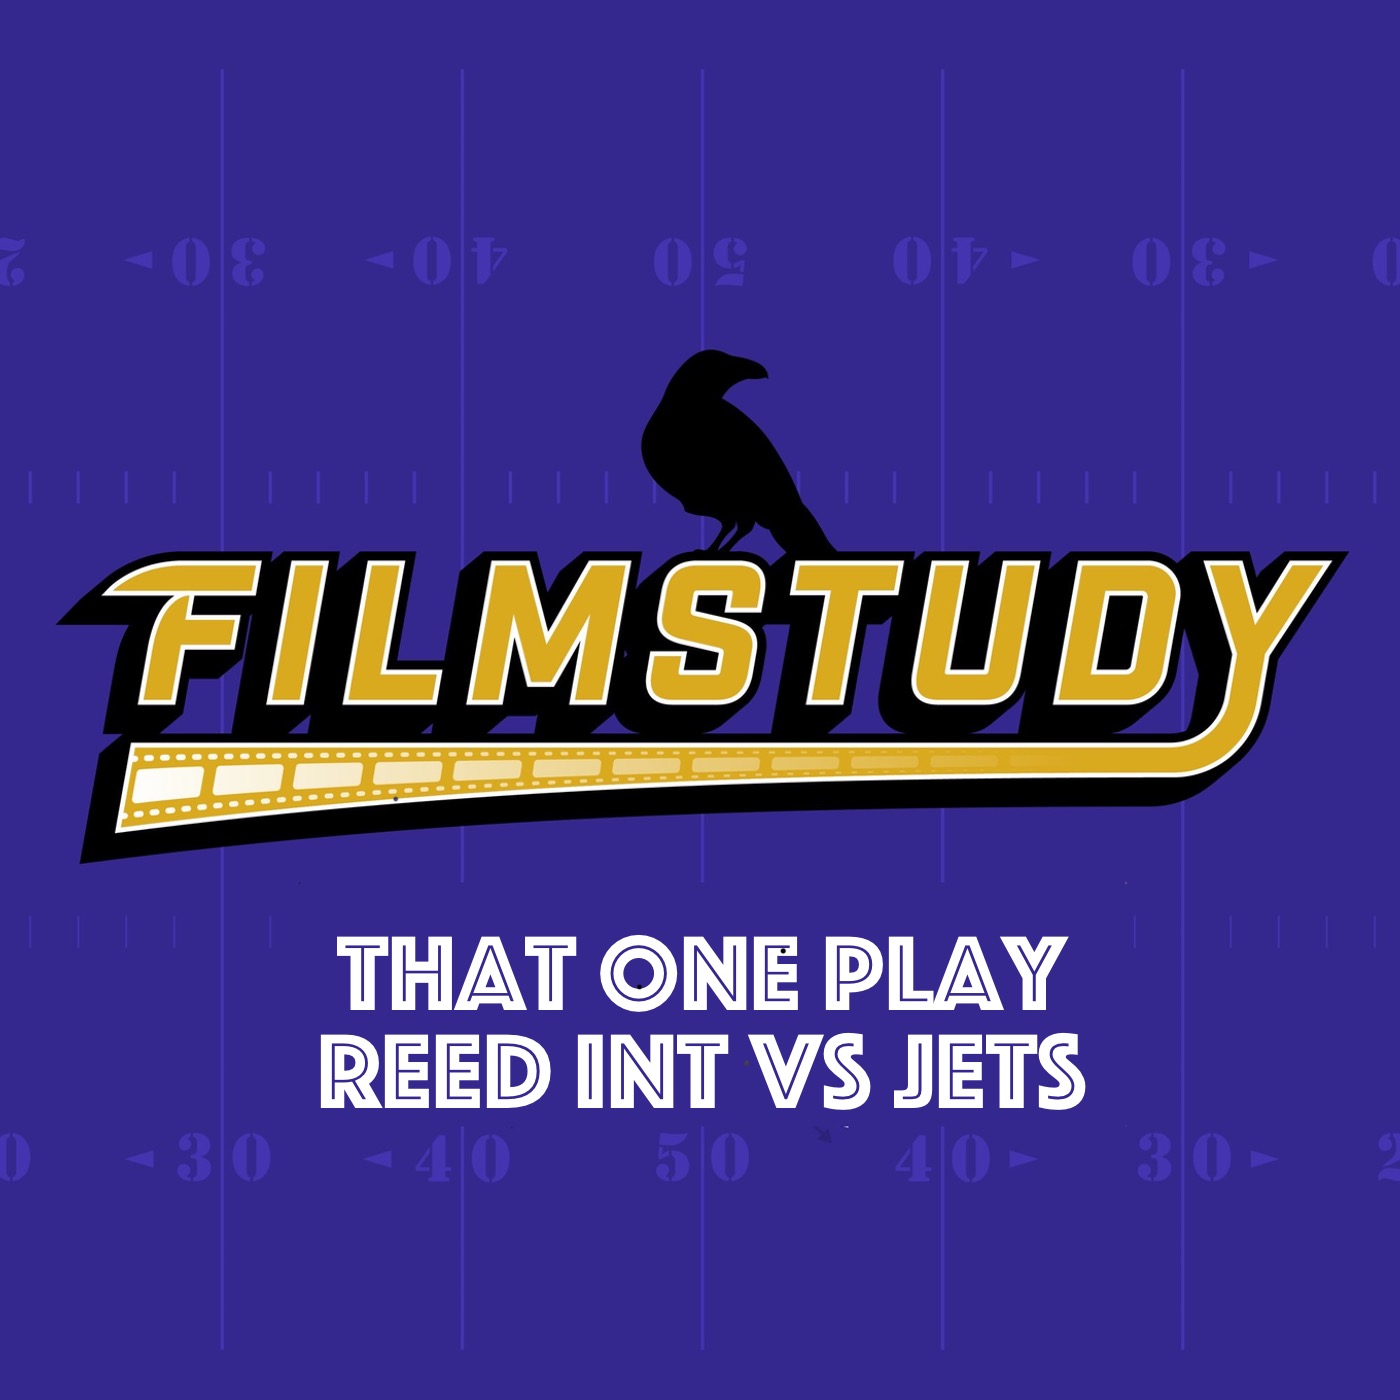 TOP : Reed INt Vs Jets